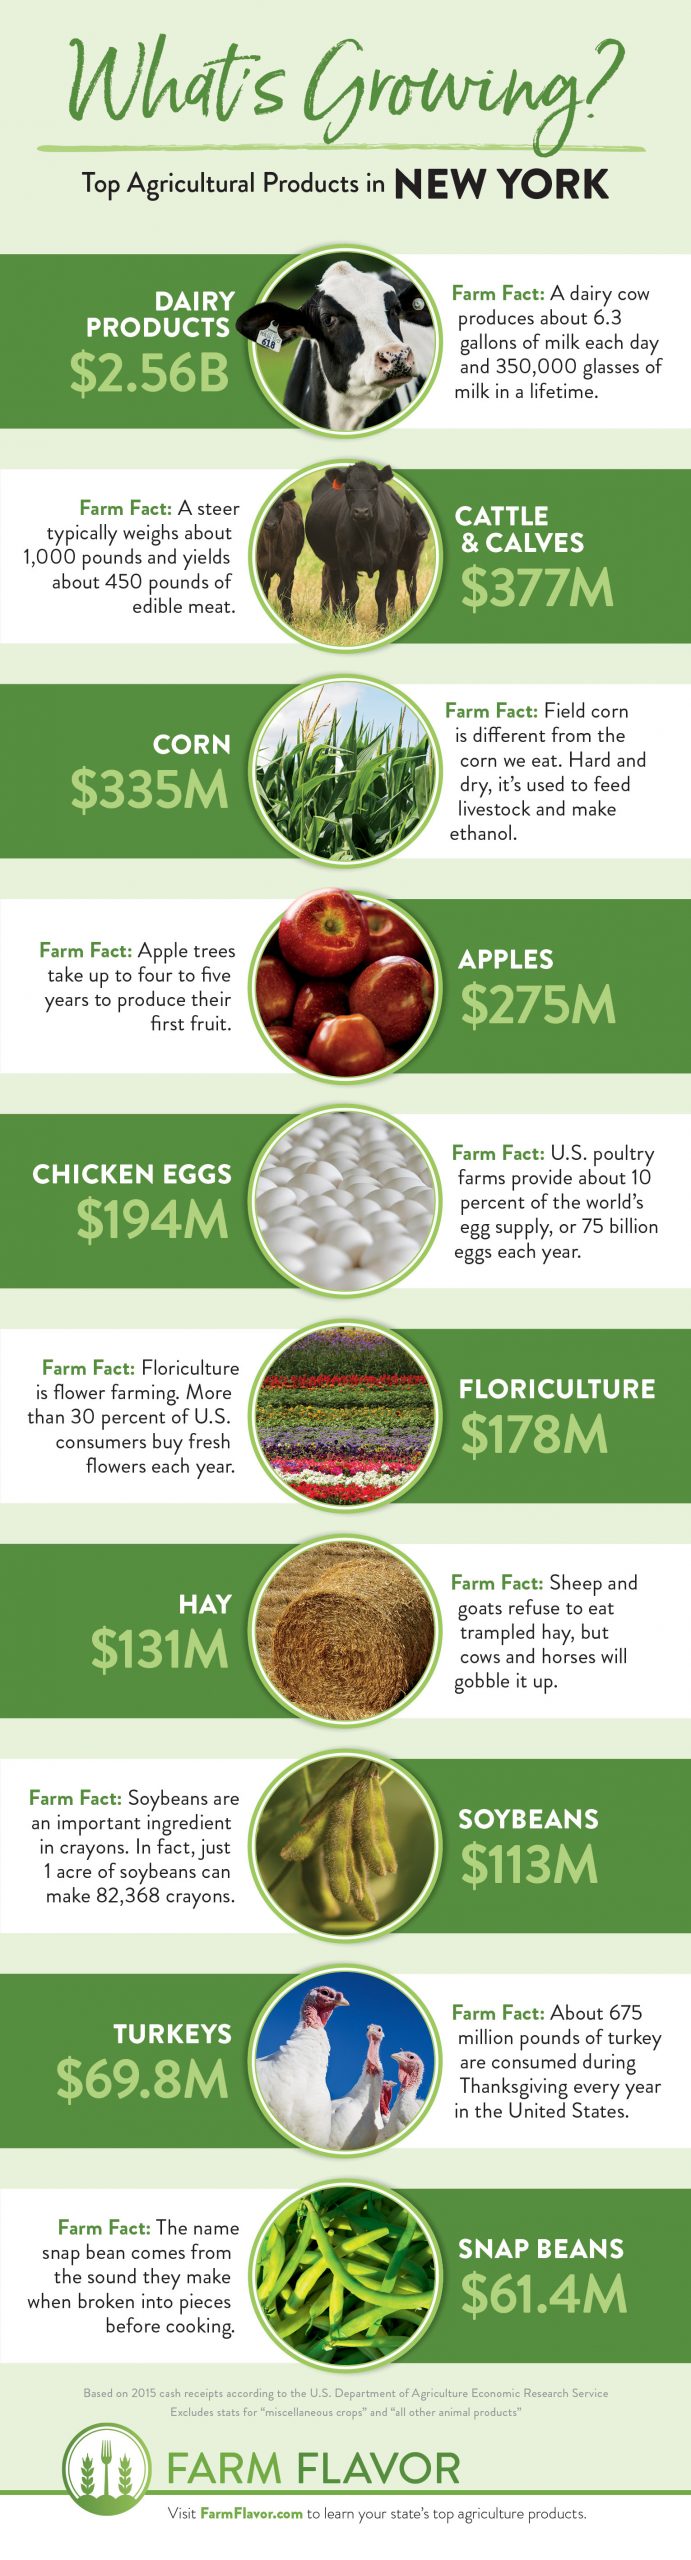 New York Top 10 ag products